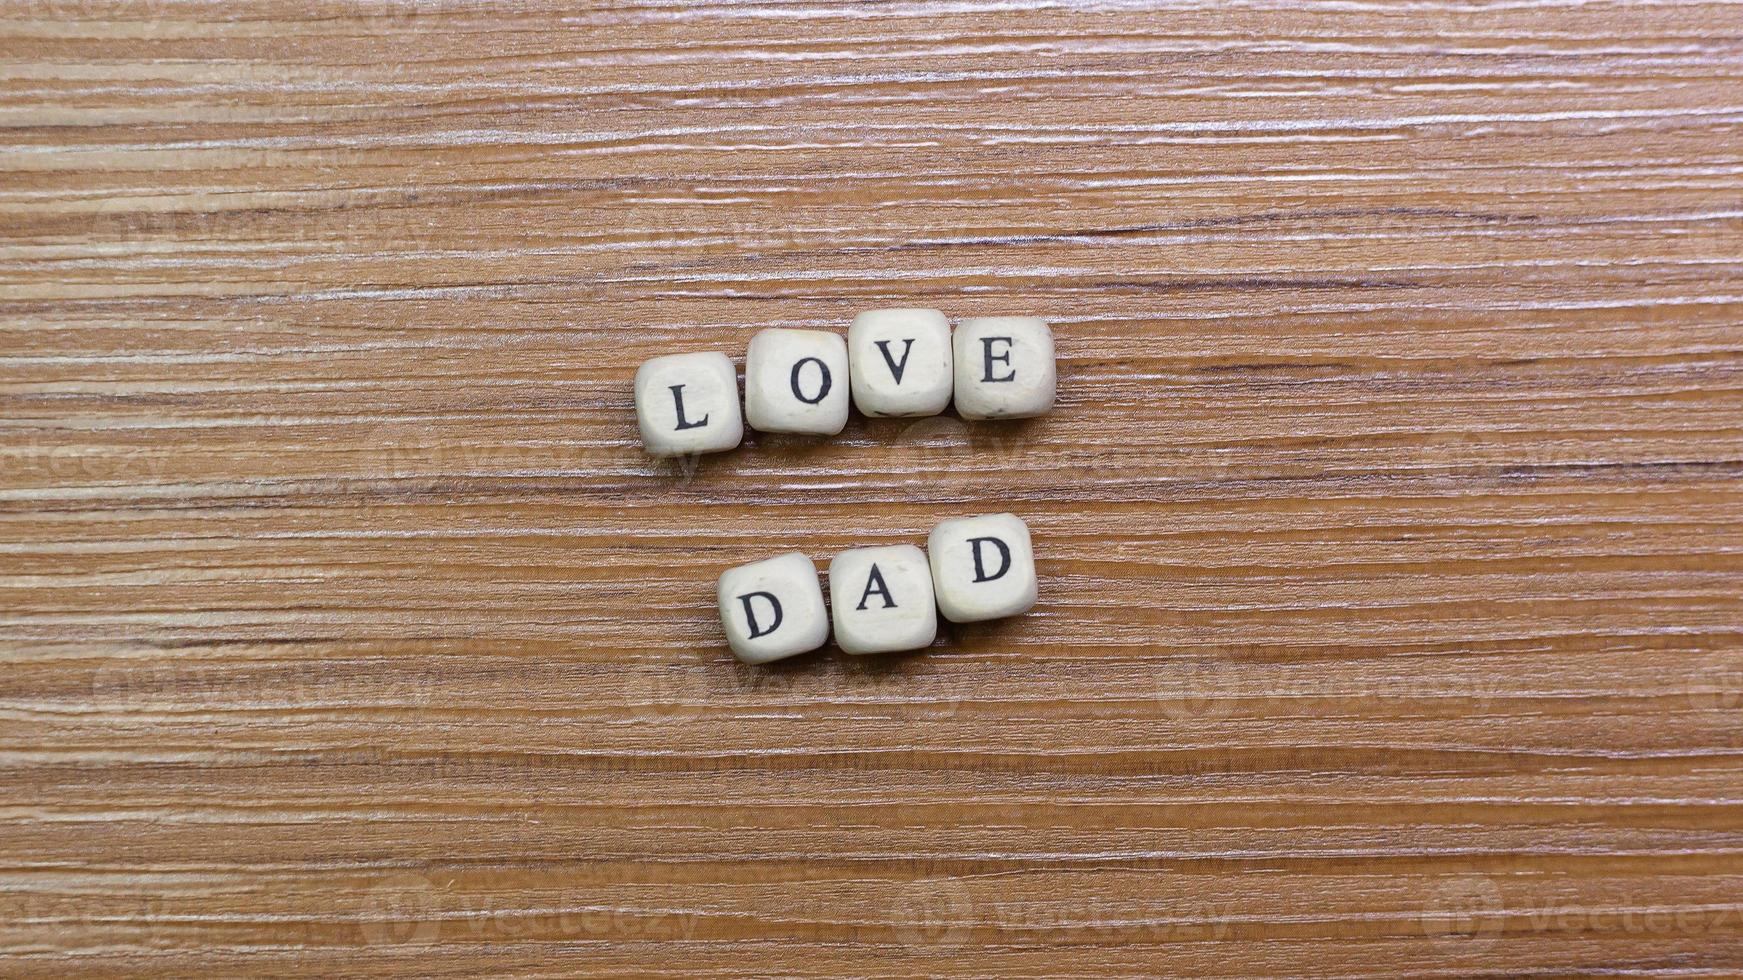 Father Day celebration on wood background top view photo